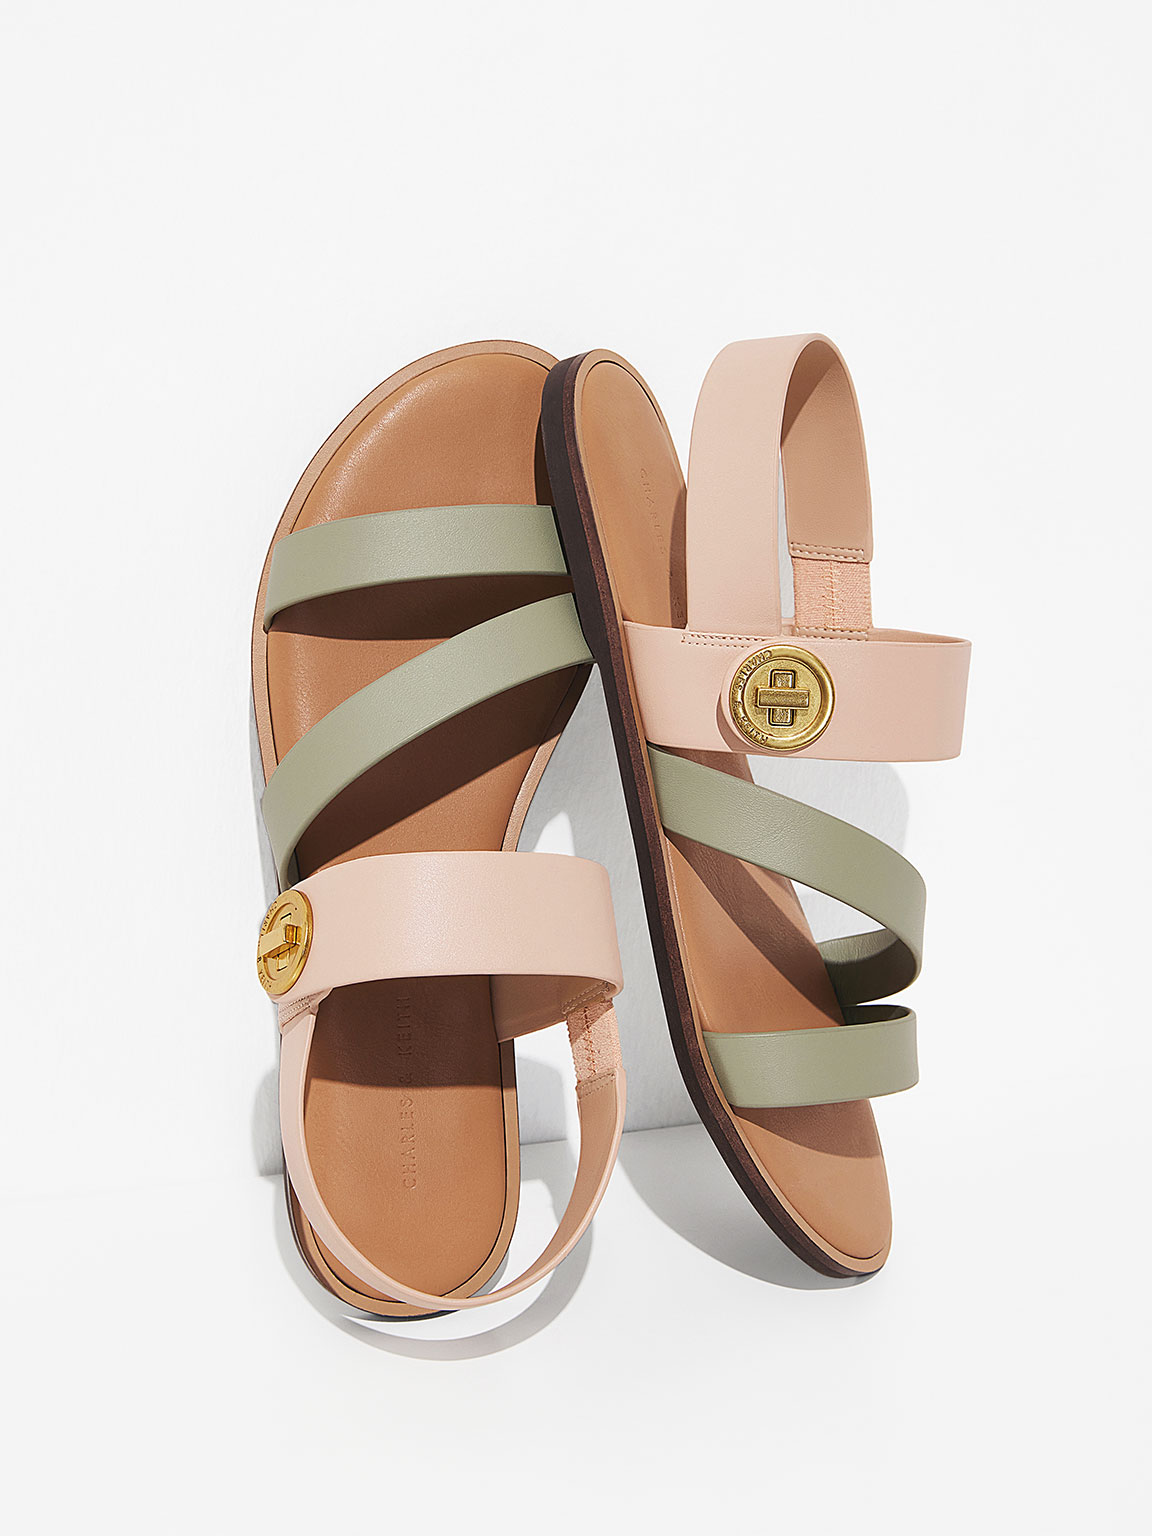 Nude Yara Two-Tone Asymmetric Strappy Sandals - CHARLES & KEITH ID